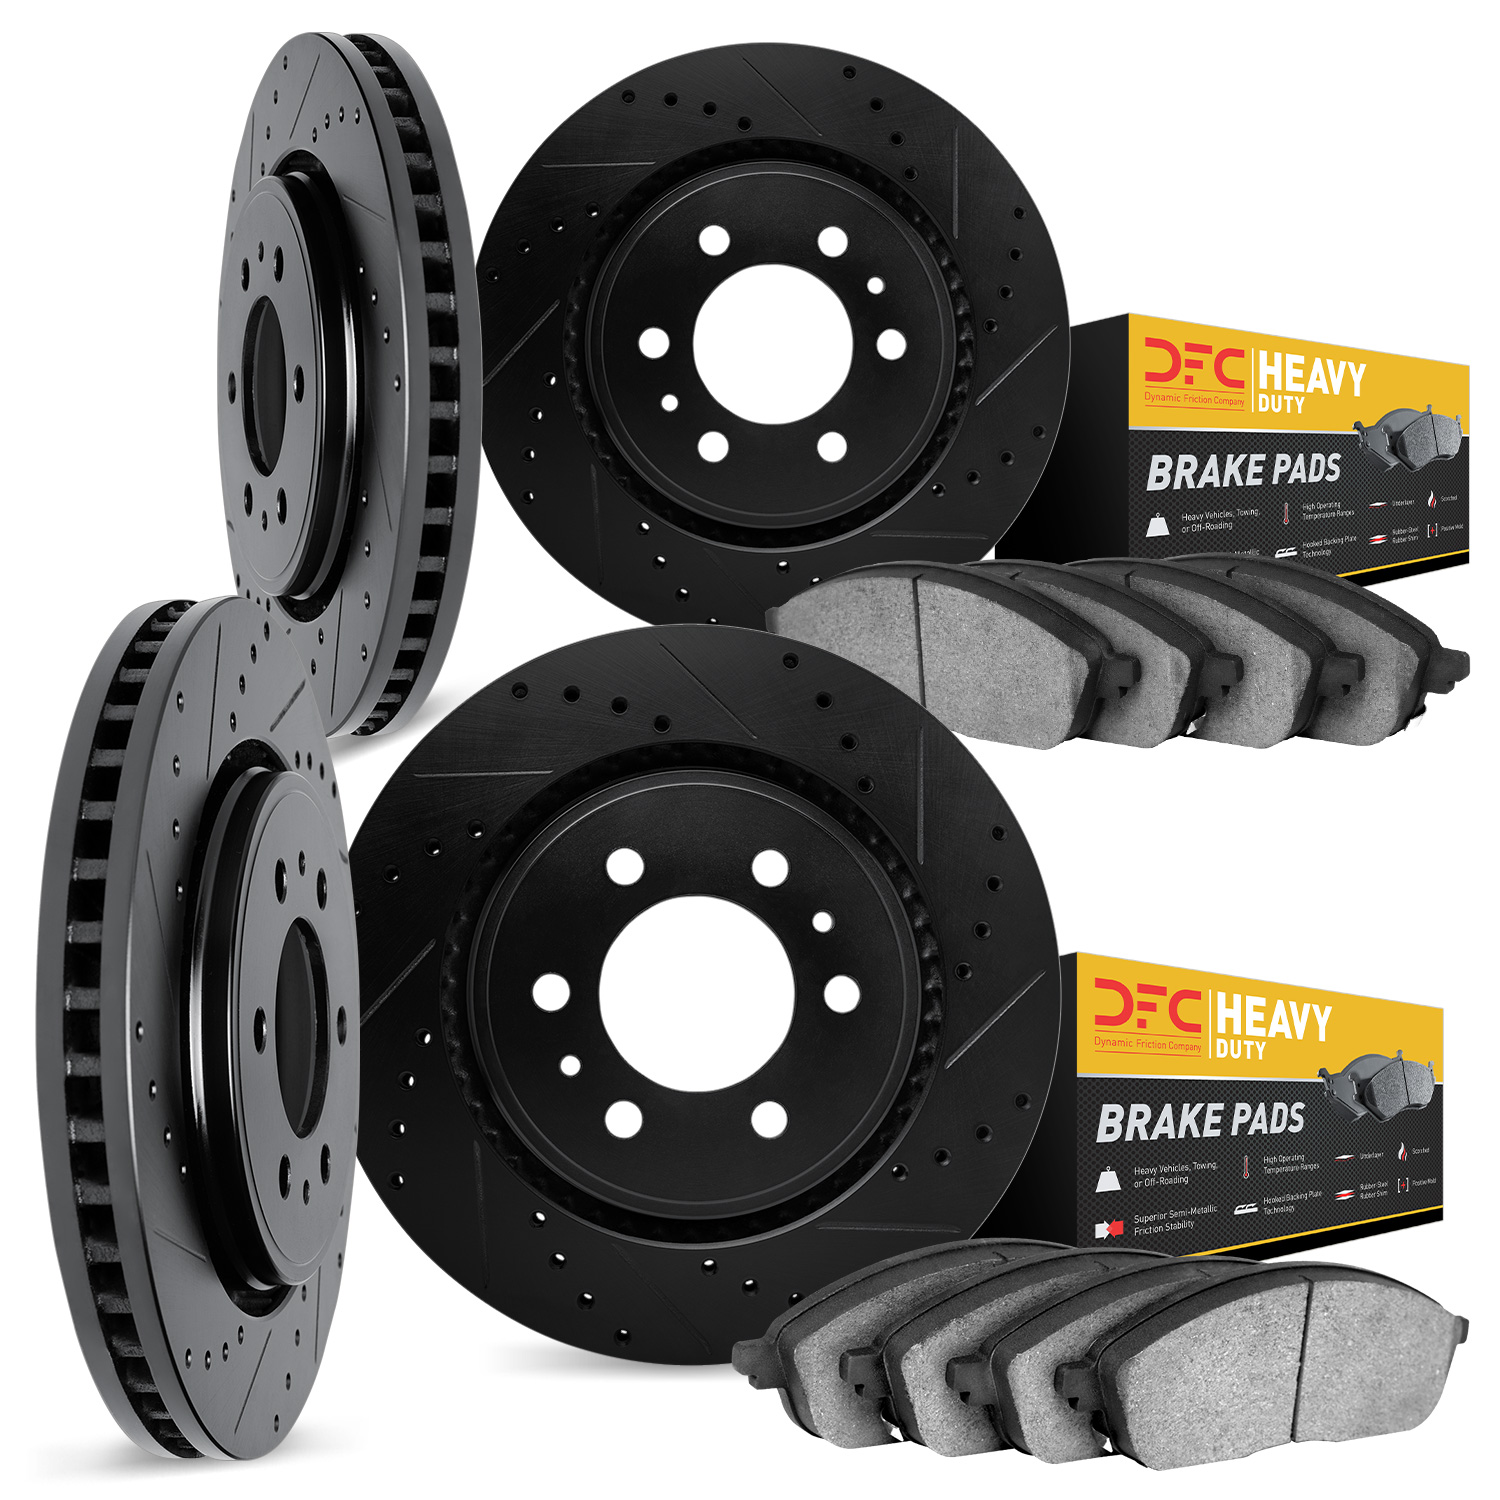 8204-67002 Drilled/Slotted Rotors w/Heavy-Duty Brake Pads Kit [Silver], Fits Select Infiniti/Nissan, Position: Front and Rear